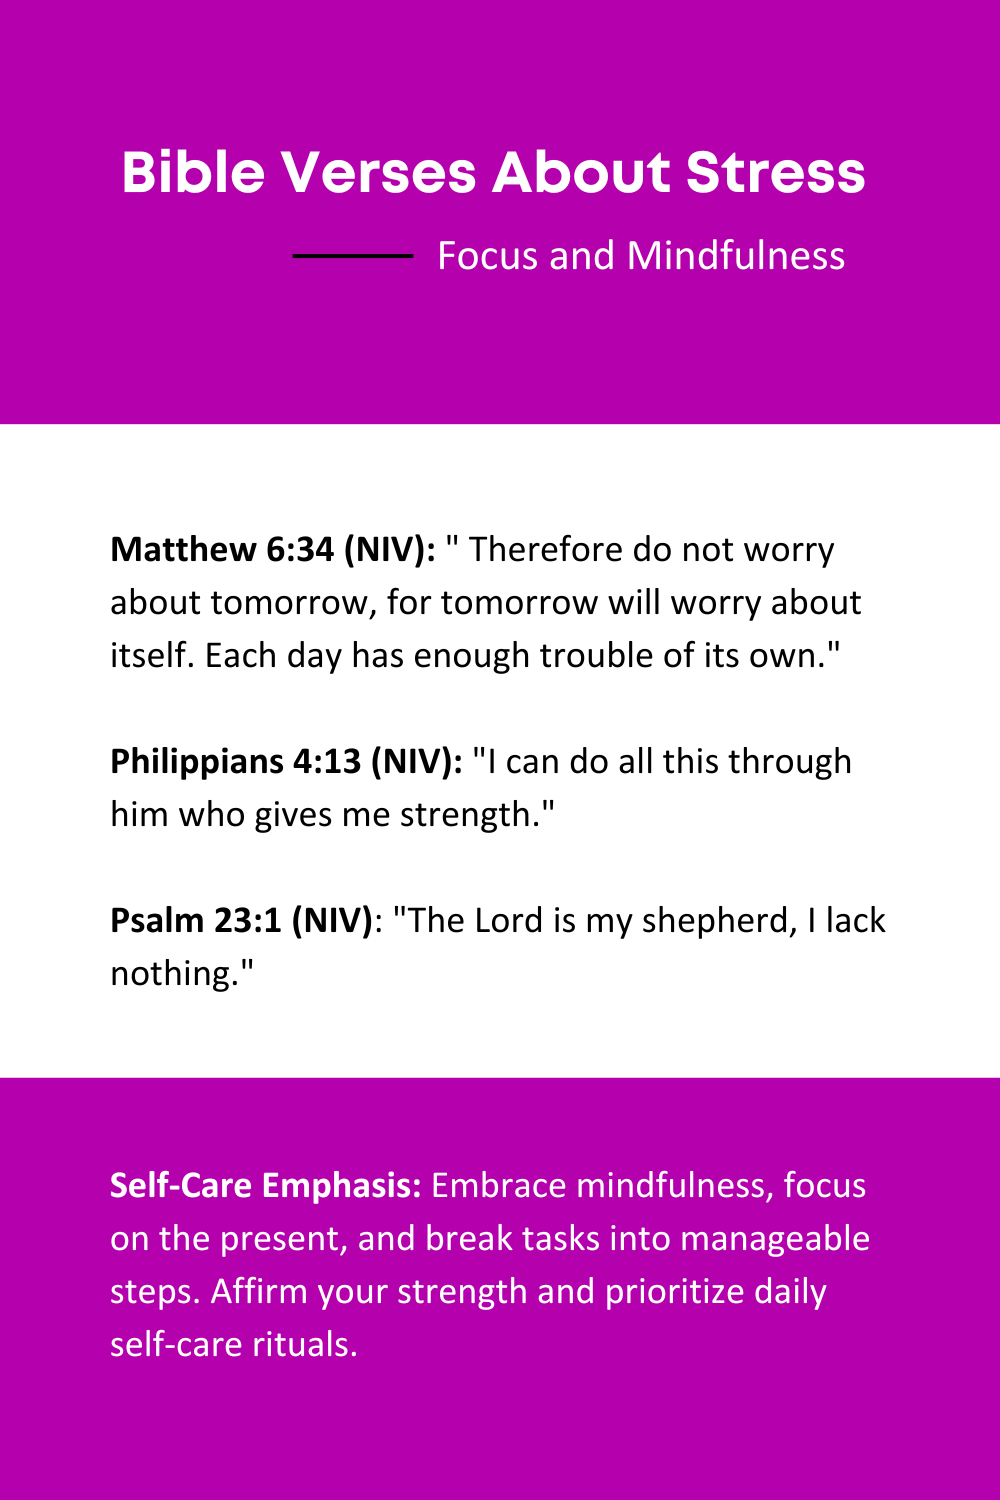 Bible-Verses-about-Stress-Self-Care-Focus-and-Mindfulness